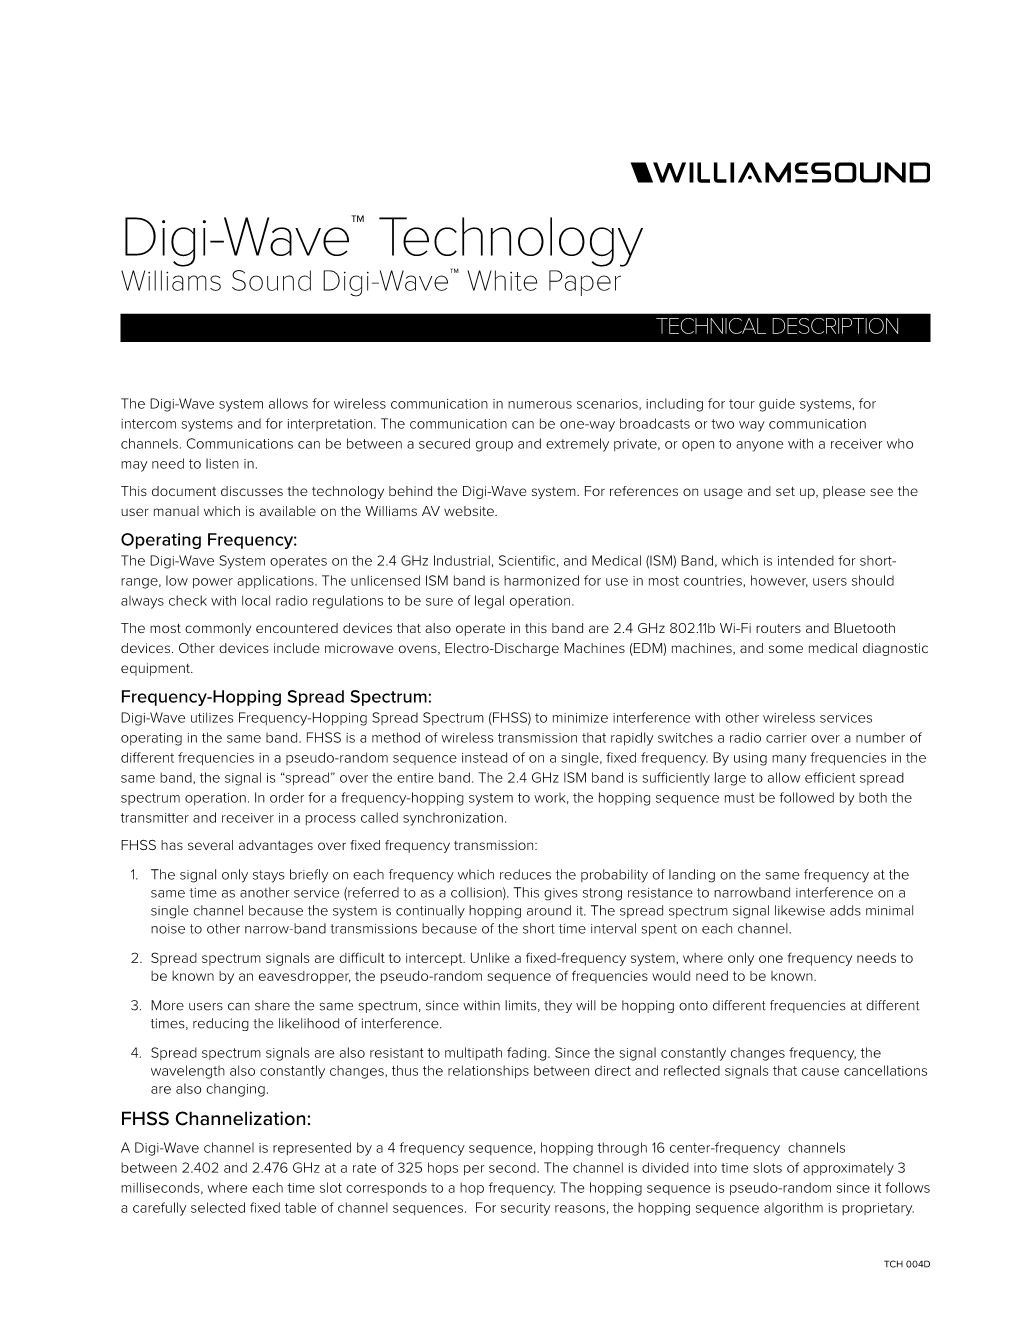 Digi-Wave Technology Provides an Excellent Low- Latency Time of Less Than 7 Milliseconds, Important for Real-Time, Voice Applications